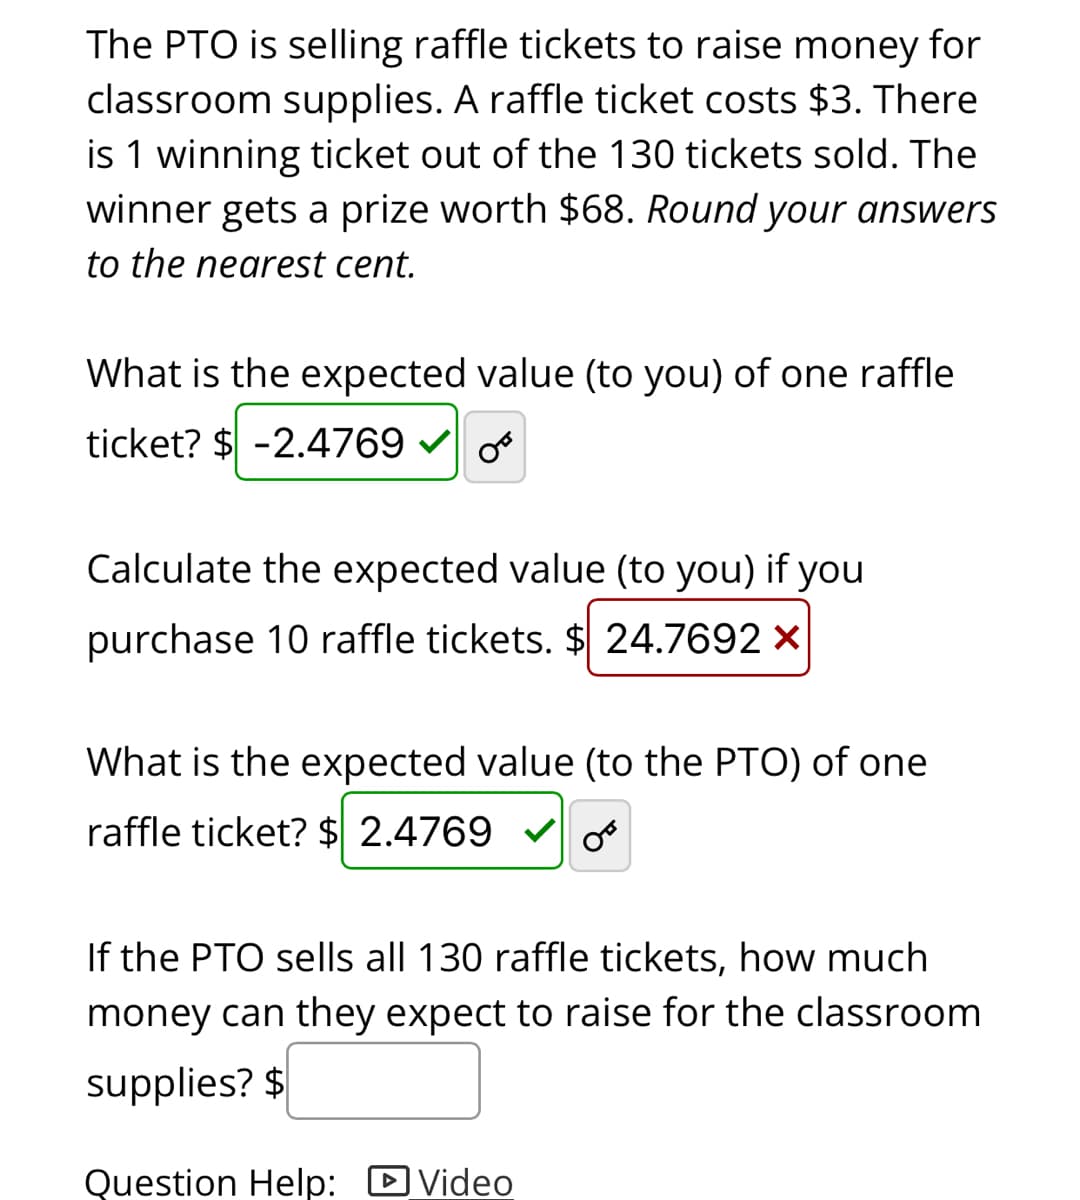 The PTO is selling raffle tickets to raise money for
classroom supplies. A raffle ticket costs $3. There
is 1 winning ticket out of the 130 tickets sold. The
winner gets a prize worth $68. Round your answers
to the nearest cent.
What is the expected value (to you) of one raffle
ticket? $ -2.4769
Calculate the expected value (to you) if you
purchase 10 raffle tickets. $ 24.7692 x
What is the expected value (to the PTO) of one
raffle ticket? $ 2.4769
If the PTO sells all 130 raffle tickets, how much
money can they expect to raise for the classroom
supplies? $
Question Help: DVideo
